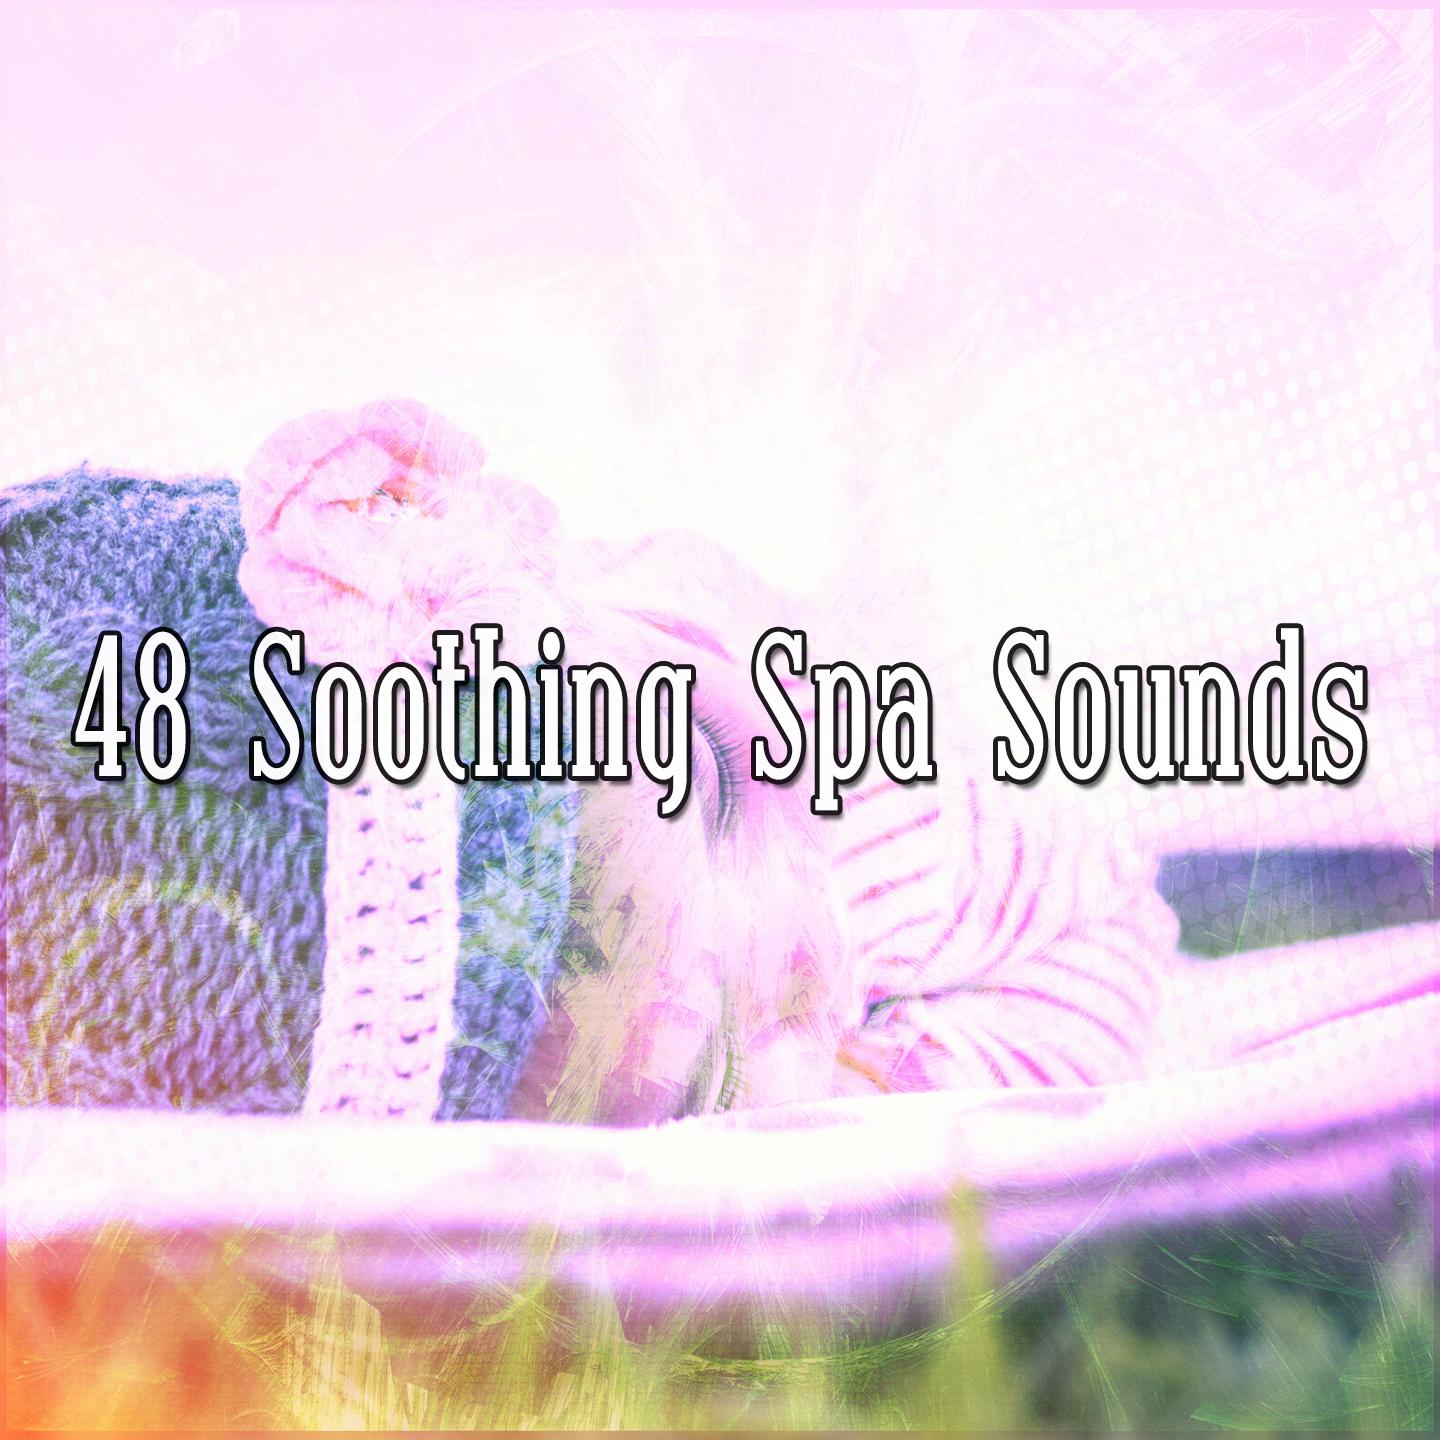 48 Soothing Spa Sounds